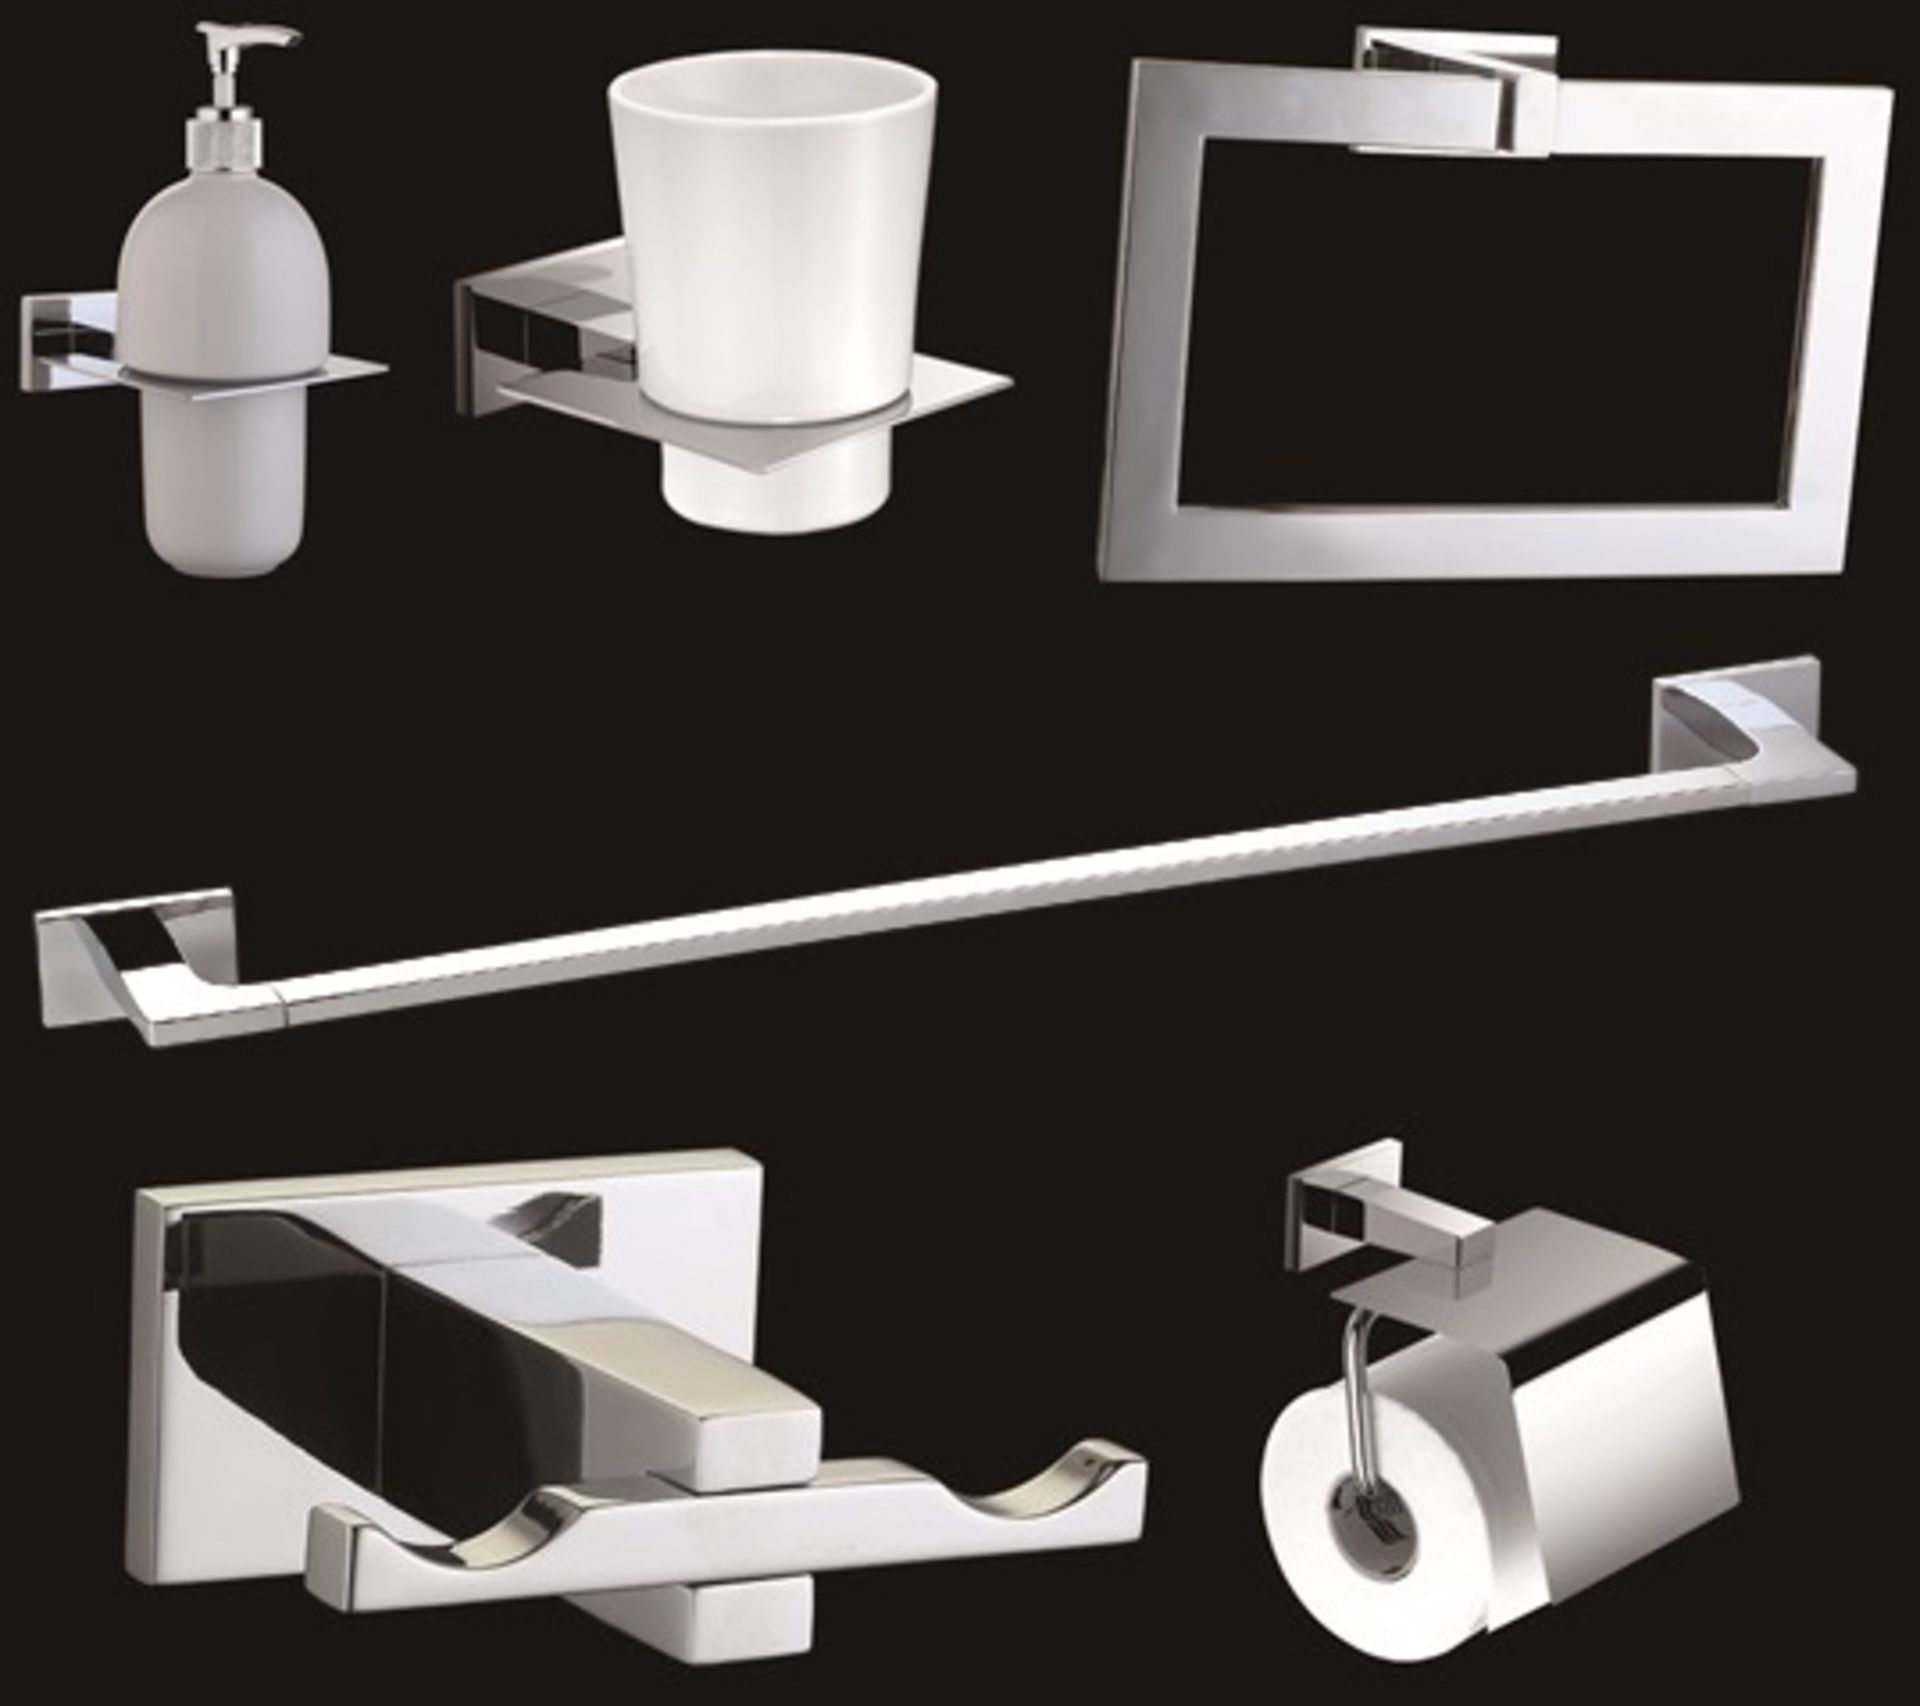 1 x Vogue Series 6 Six Piece Bathroom Accessory Set - Includes WC Roll Holder, Soap Dispenser, - Image 2 of 12